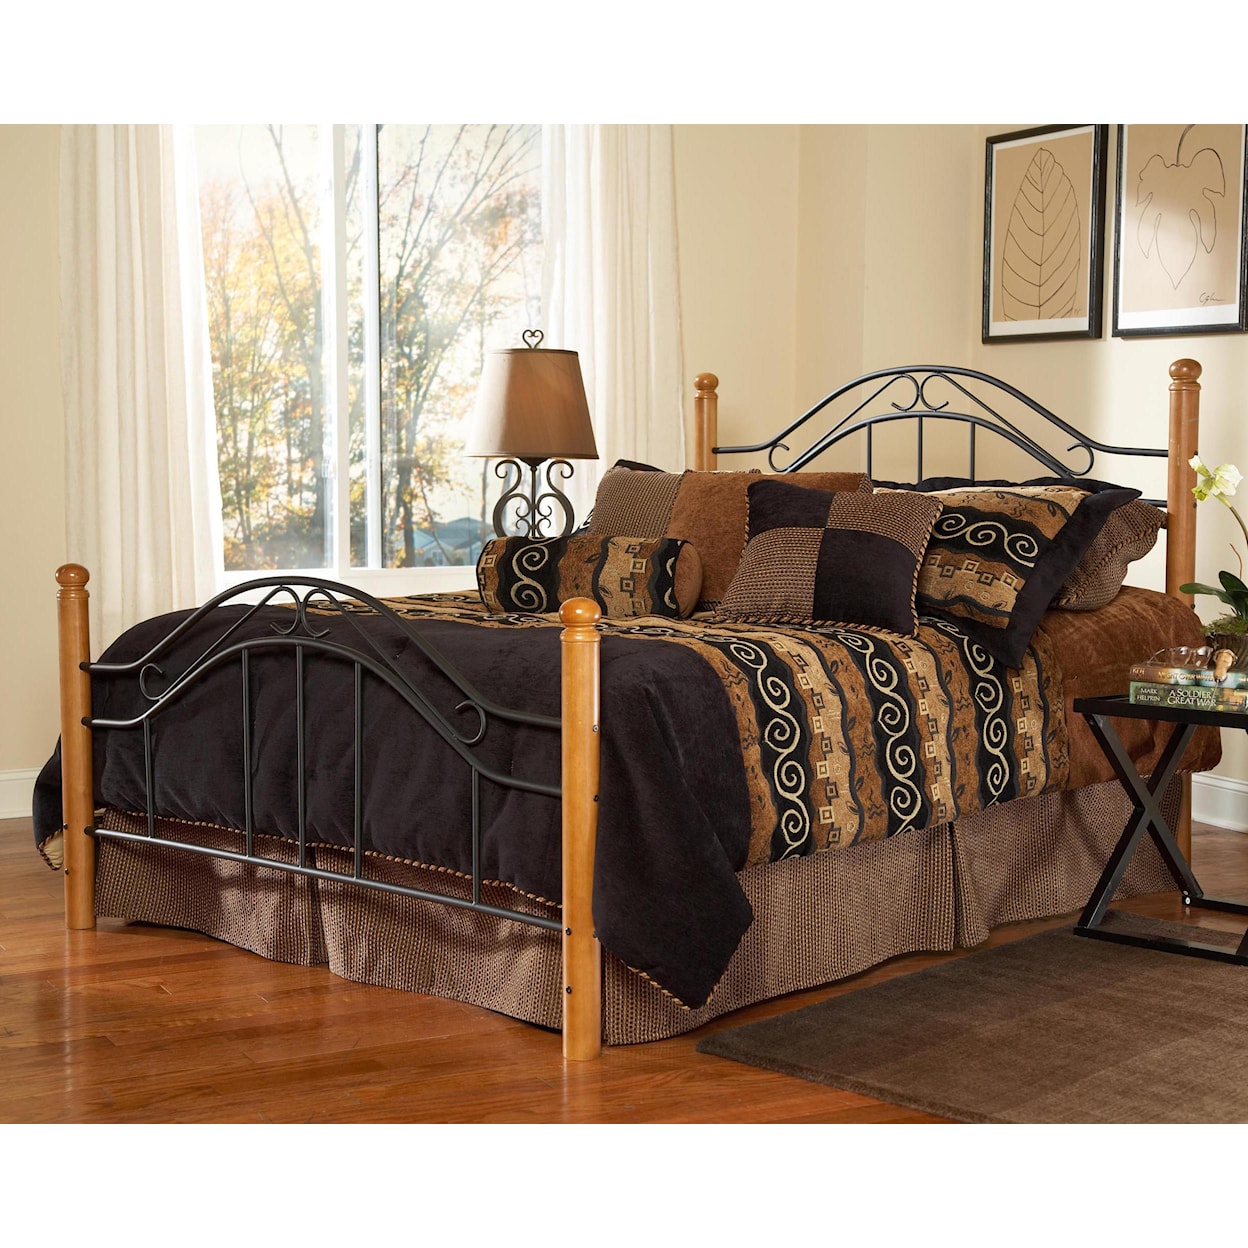 Hillsdale Wood Beds King Winsloh Bed